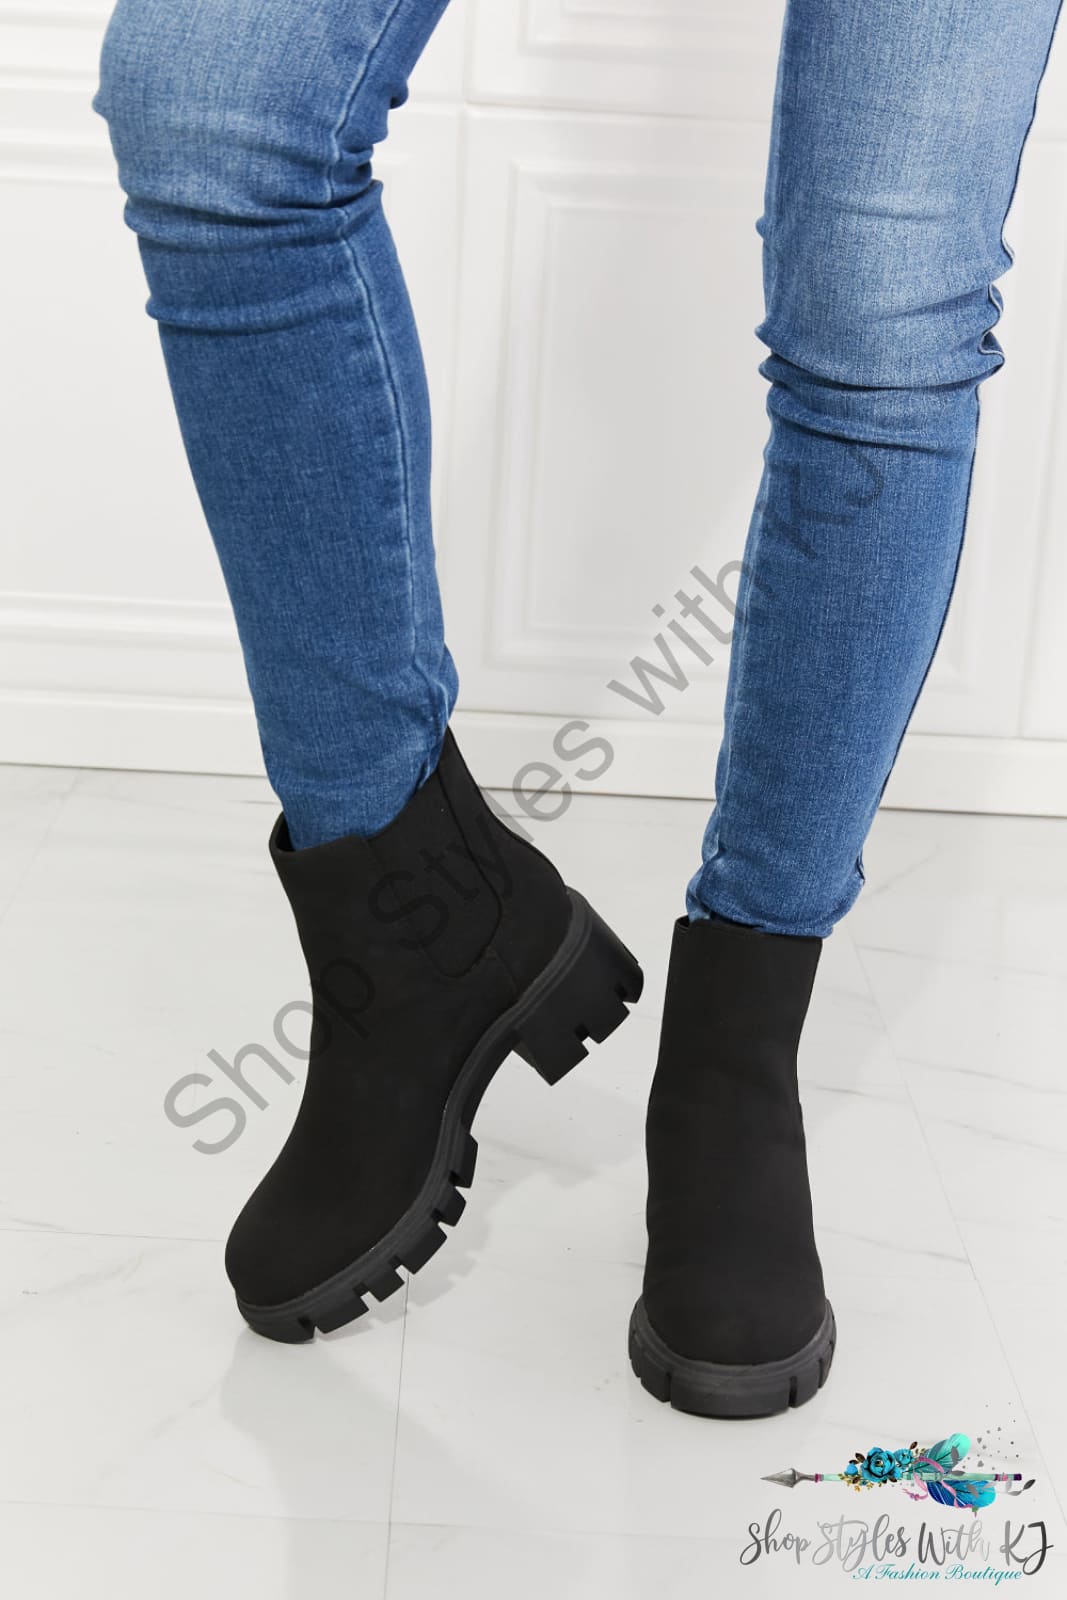 Work For It Matte Lug Sole Chelsea Boots In Black / 6 Shoes